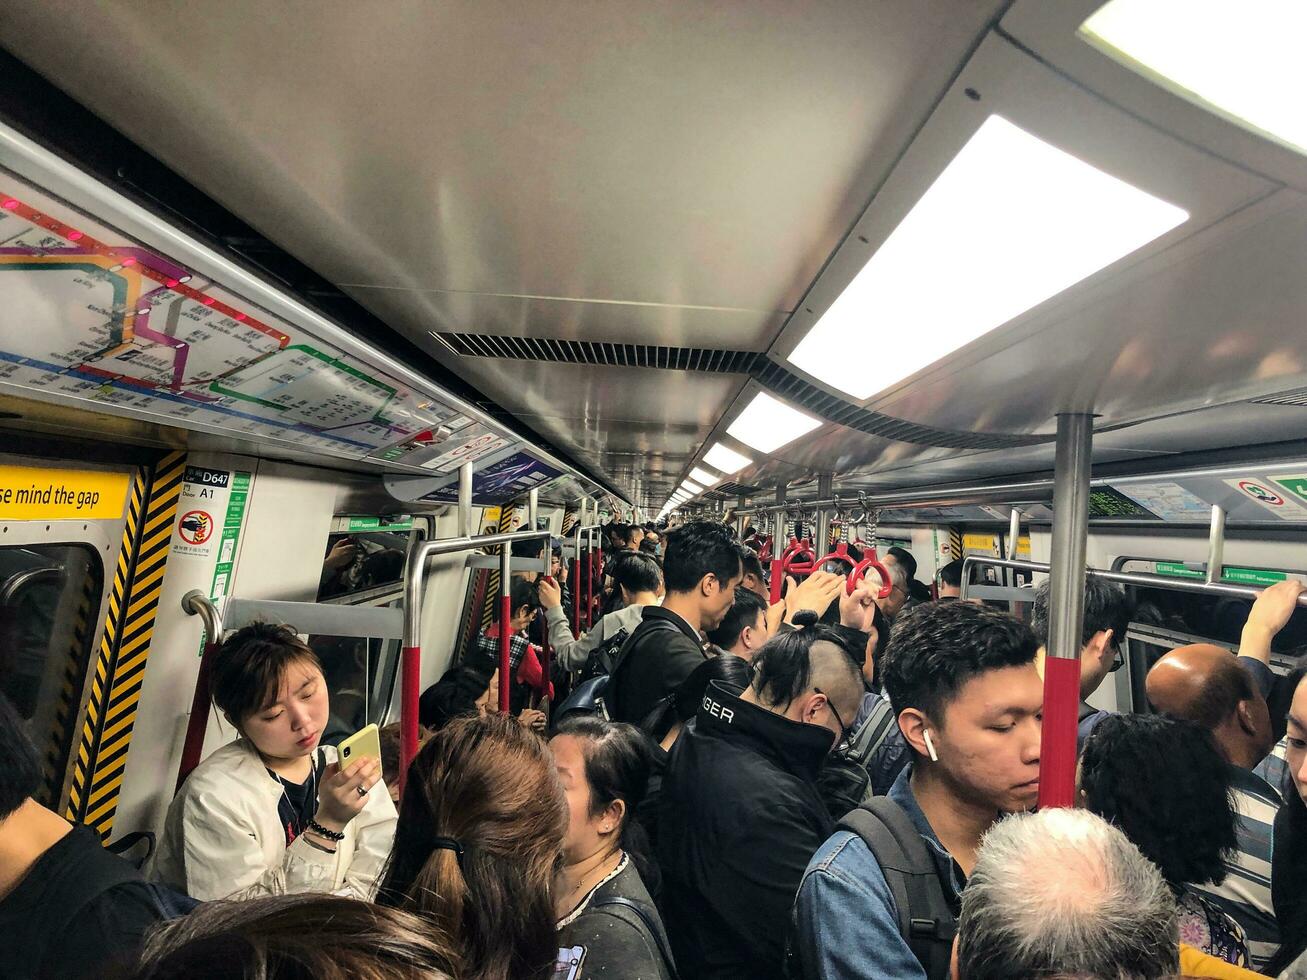 Hong Kong- May 19, 2019 The Mass Transit Railway or MTR is a major public transport network serving Hong Kong. Crowded rush hour. photo